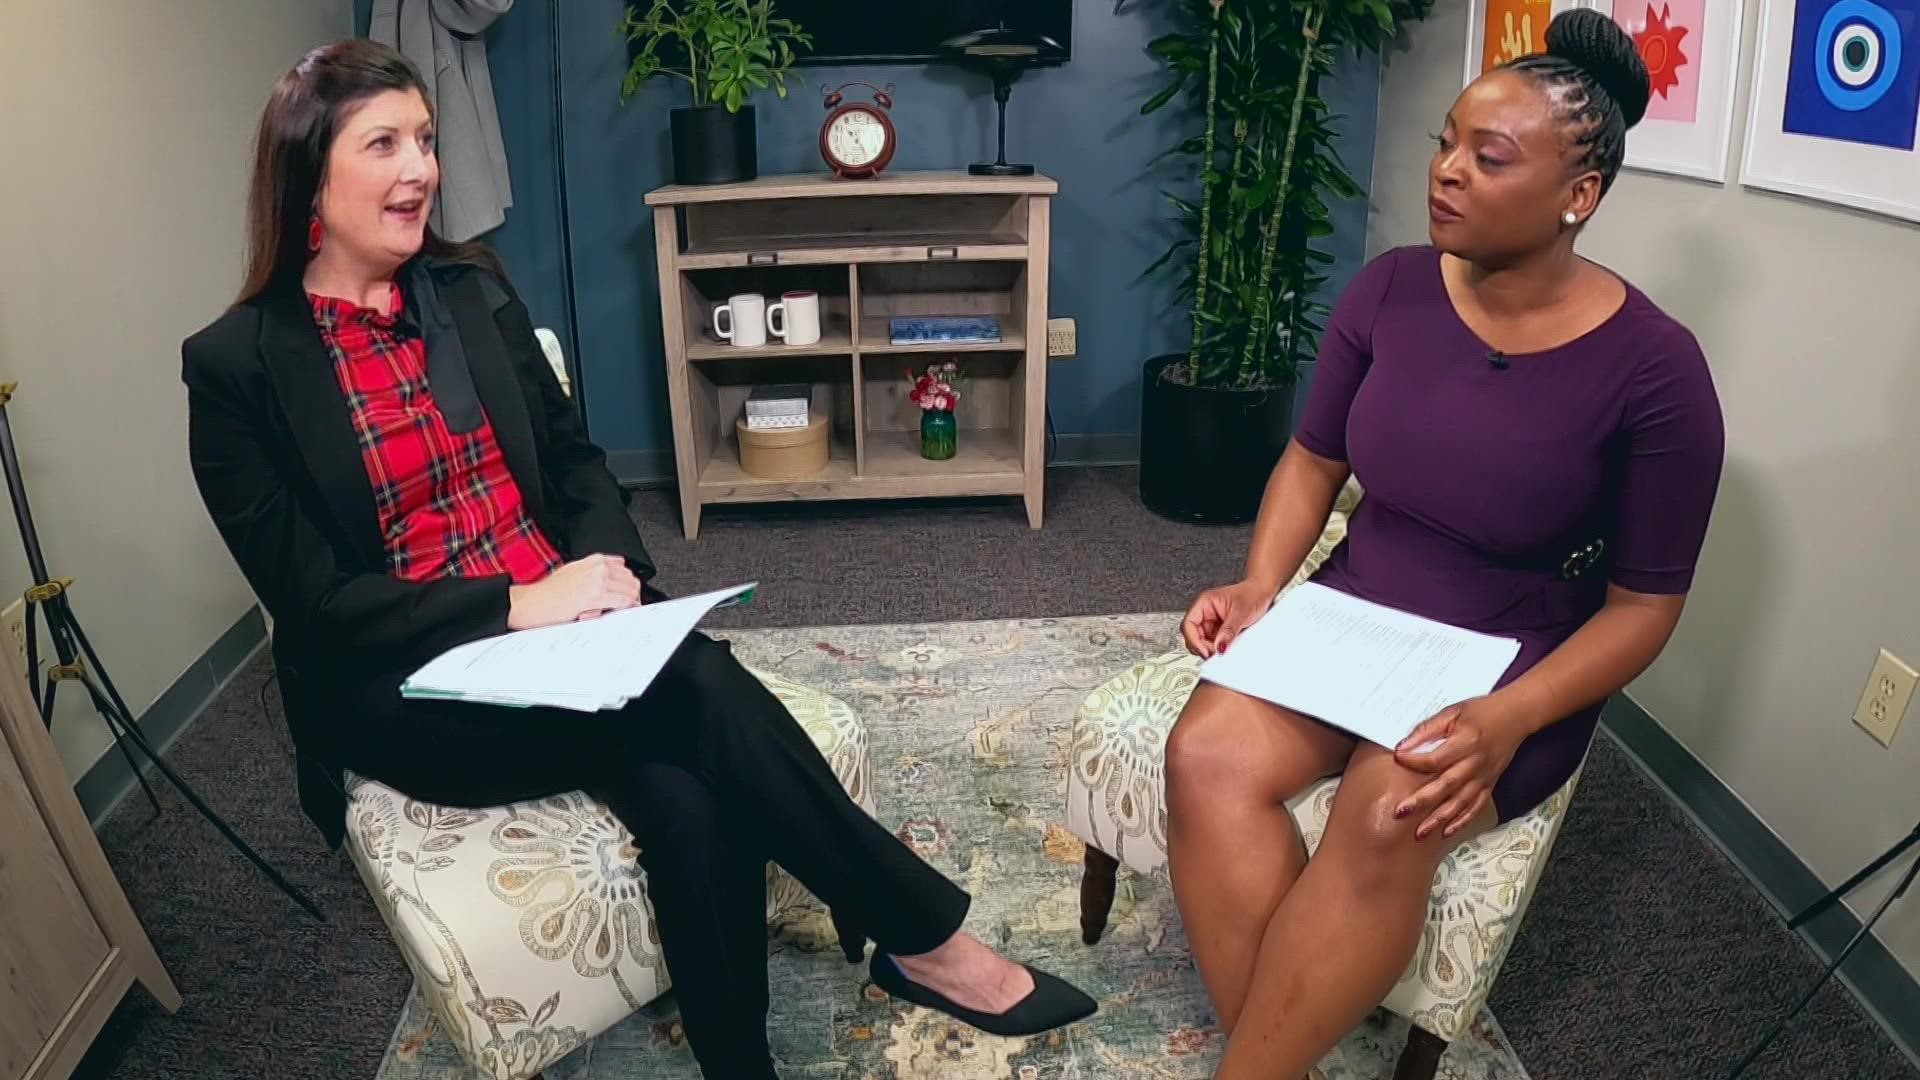 Guilford County Schools superintendent Dr. Whitney Oakley sat down with WFMY News 2’s Lauren Coleman to discuss her ‘Better Together’ series.